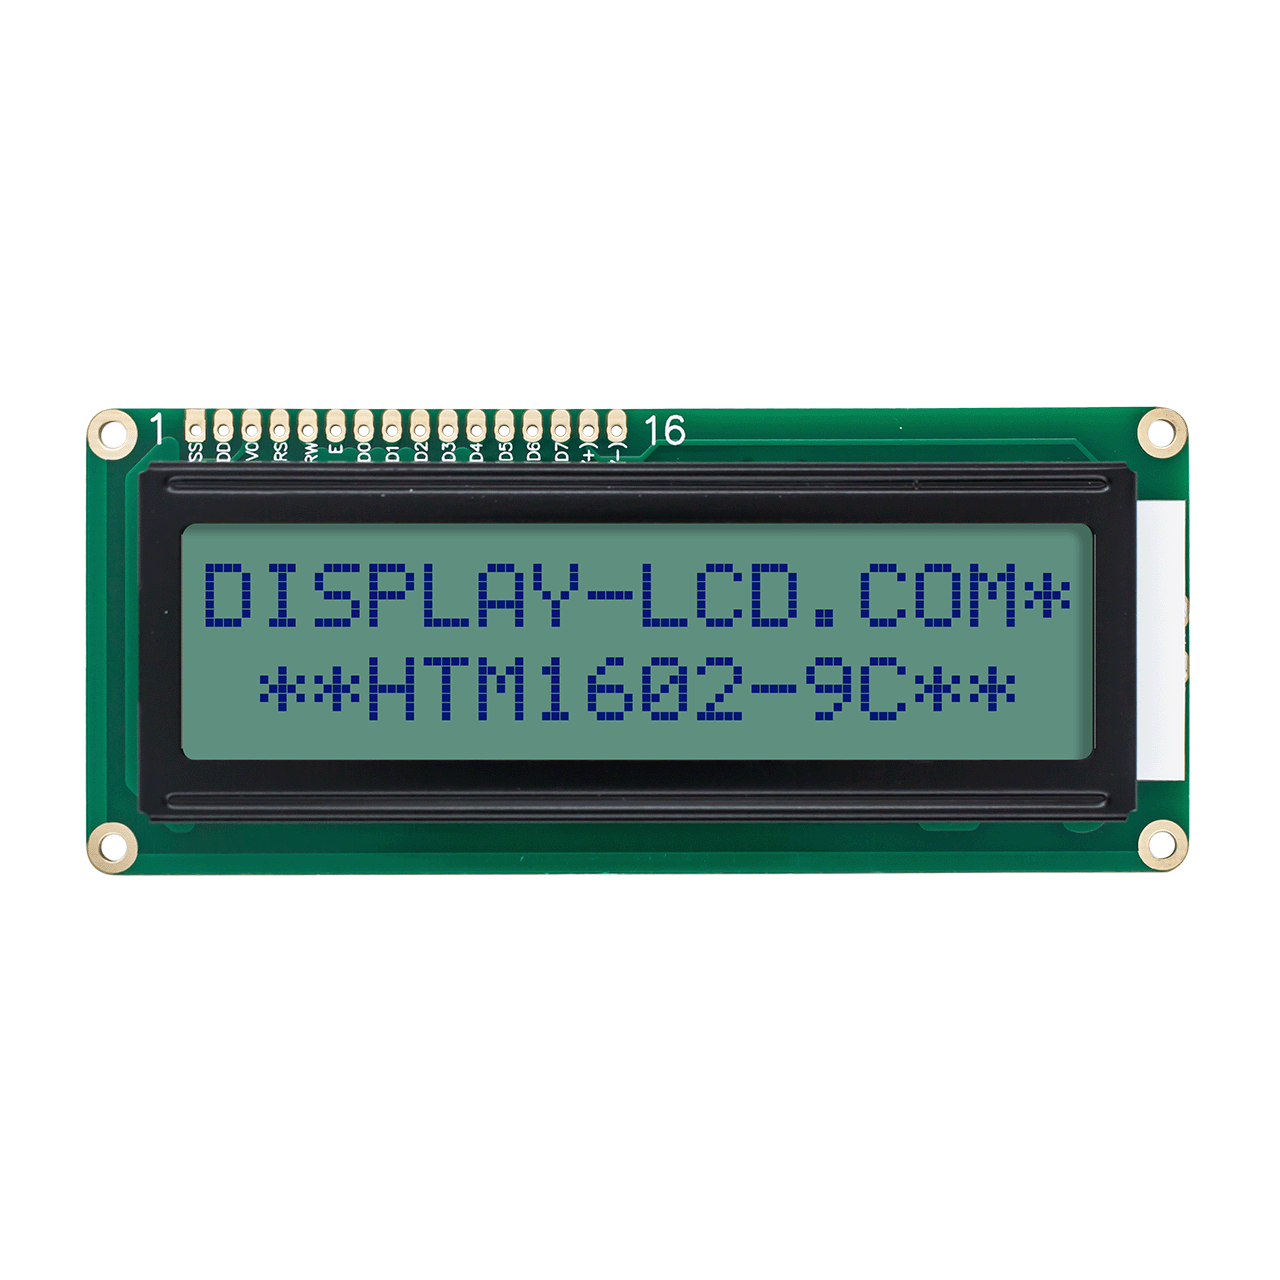 2X16 Character LCD Display | STN+ Gray Display with White Side Backlight-Arduino